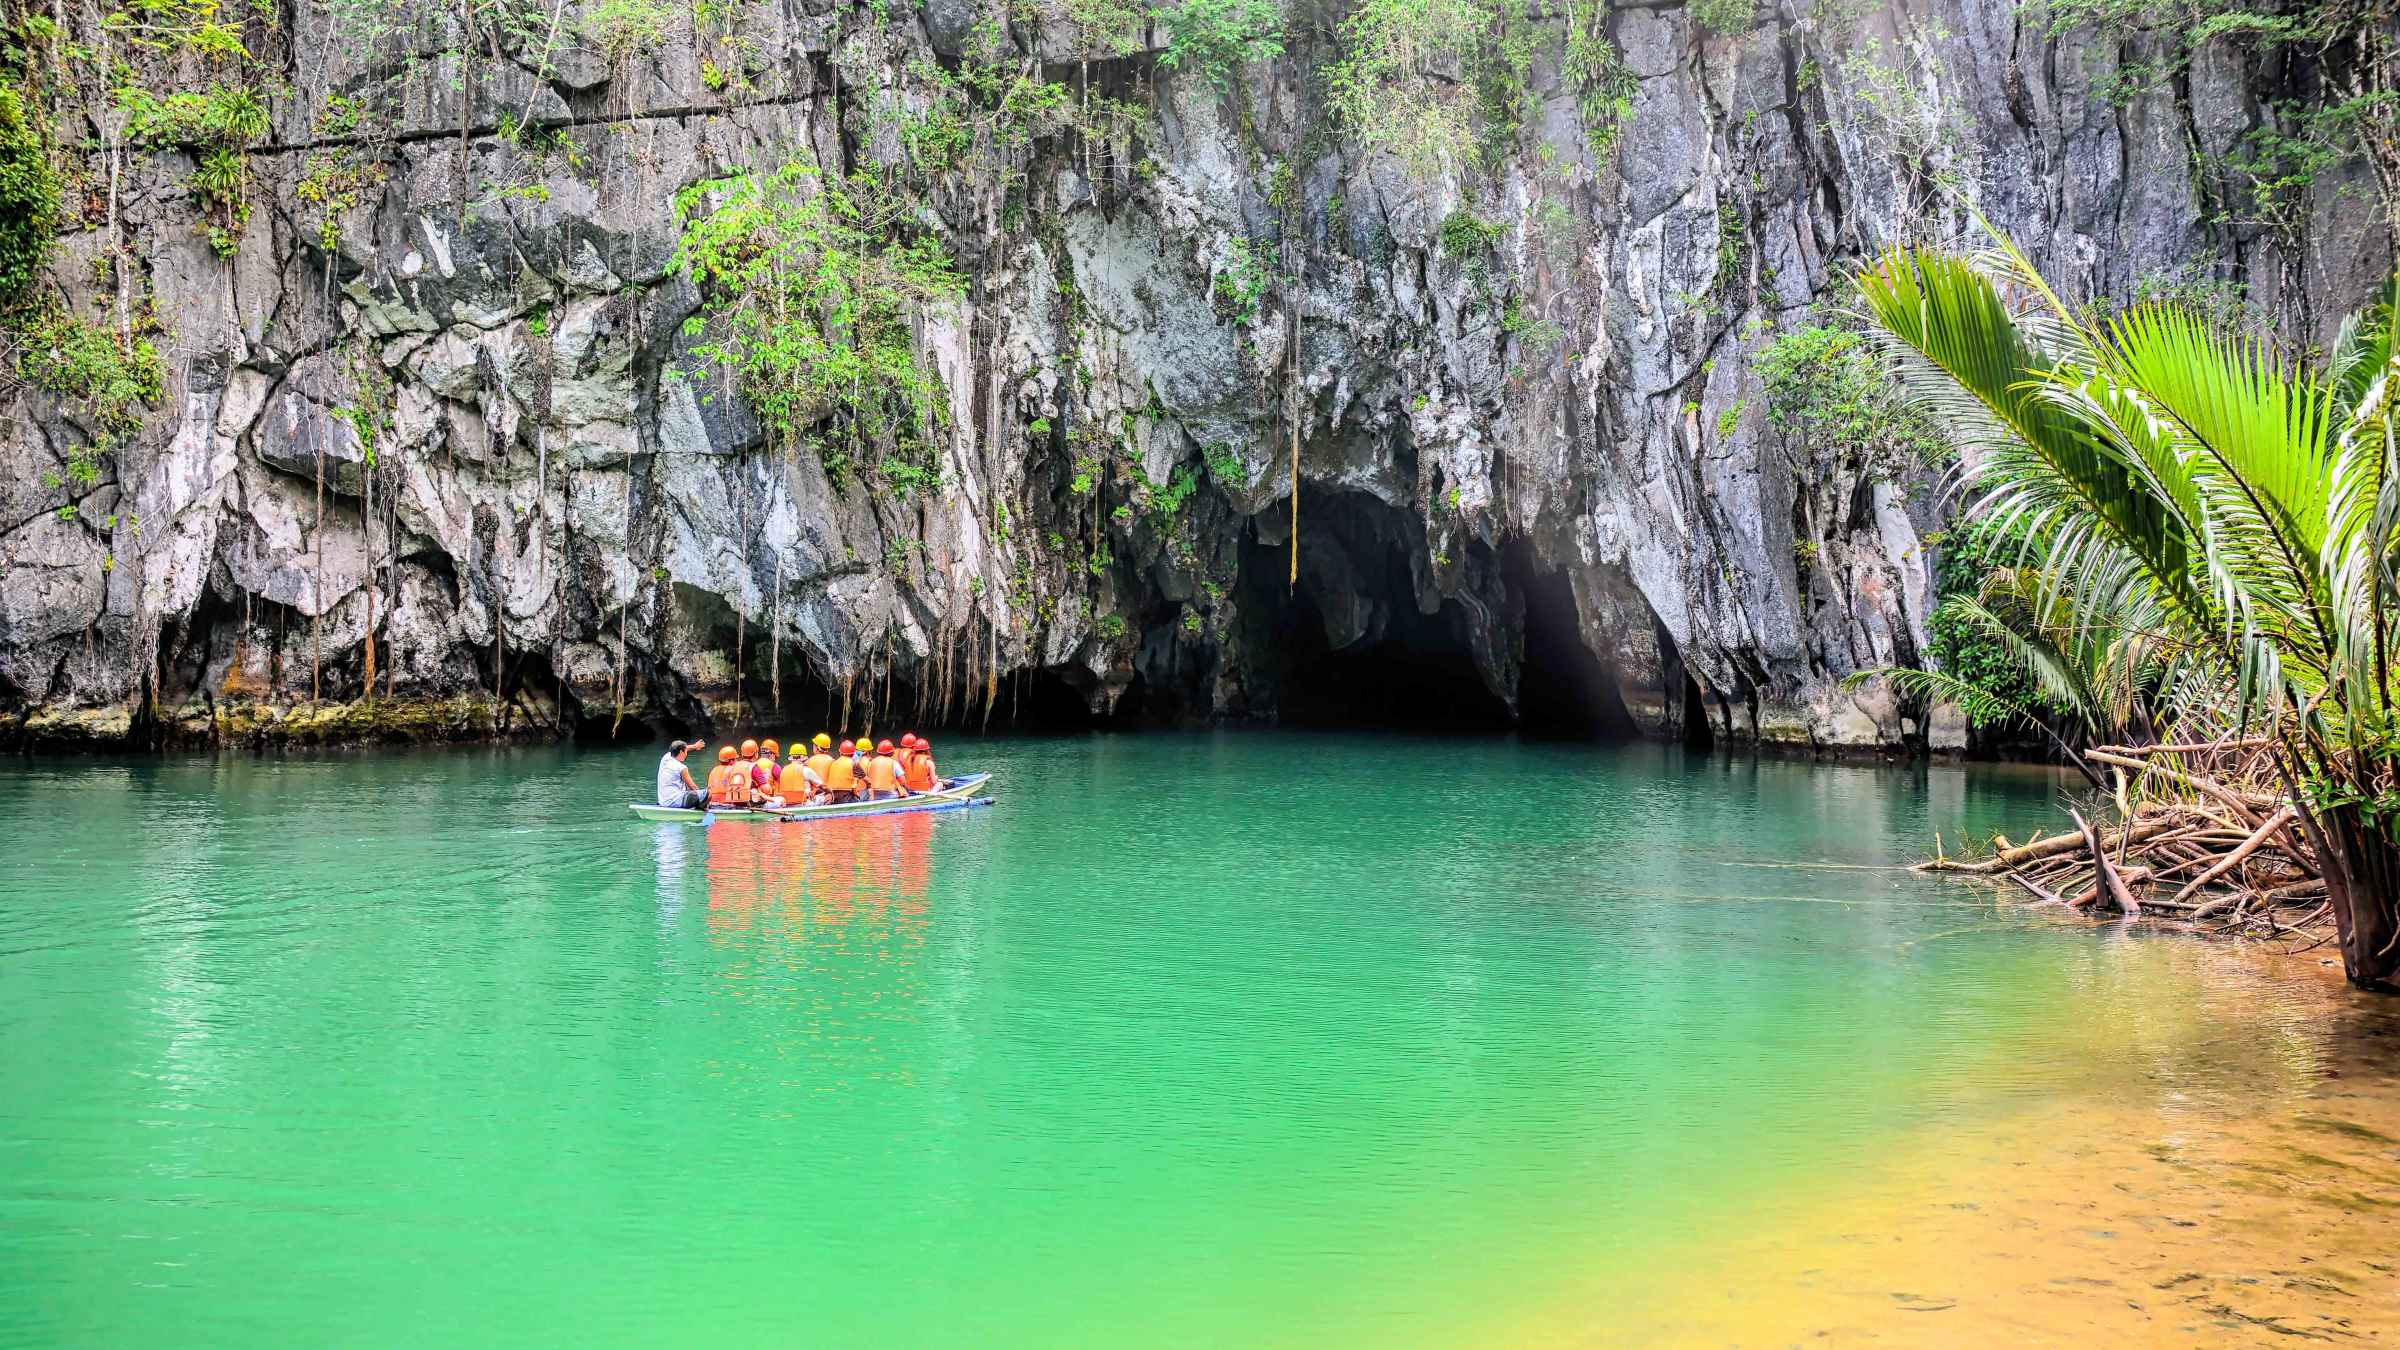 Puerto Princesa 2021: Top 10 Tours & Activities (with Photos) - Things